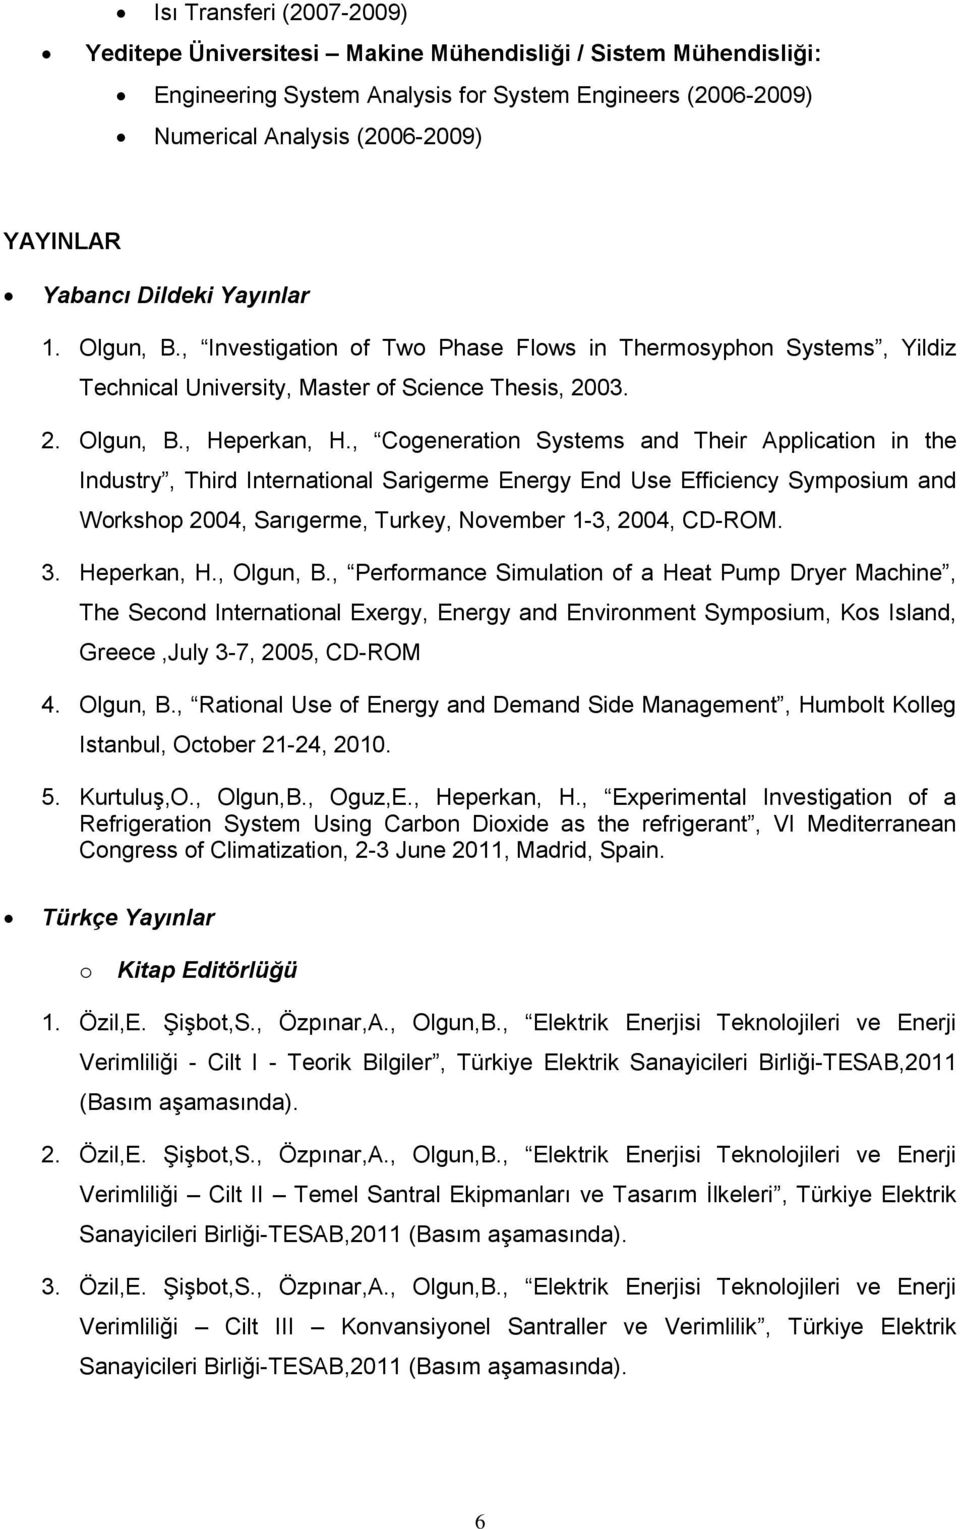 , Cogeneration Systems and Their Application in the Industry, Third International Sarigerme Energy End Use Efficiency Symposium and Workshop 2004, Sarıgerme, Turkey, November 1-3, 2004, CD-ROM. 3.